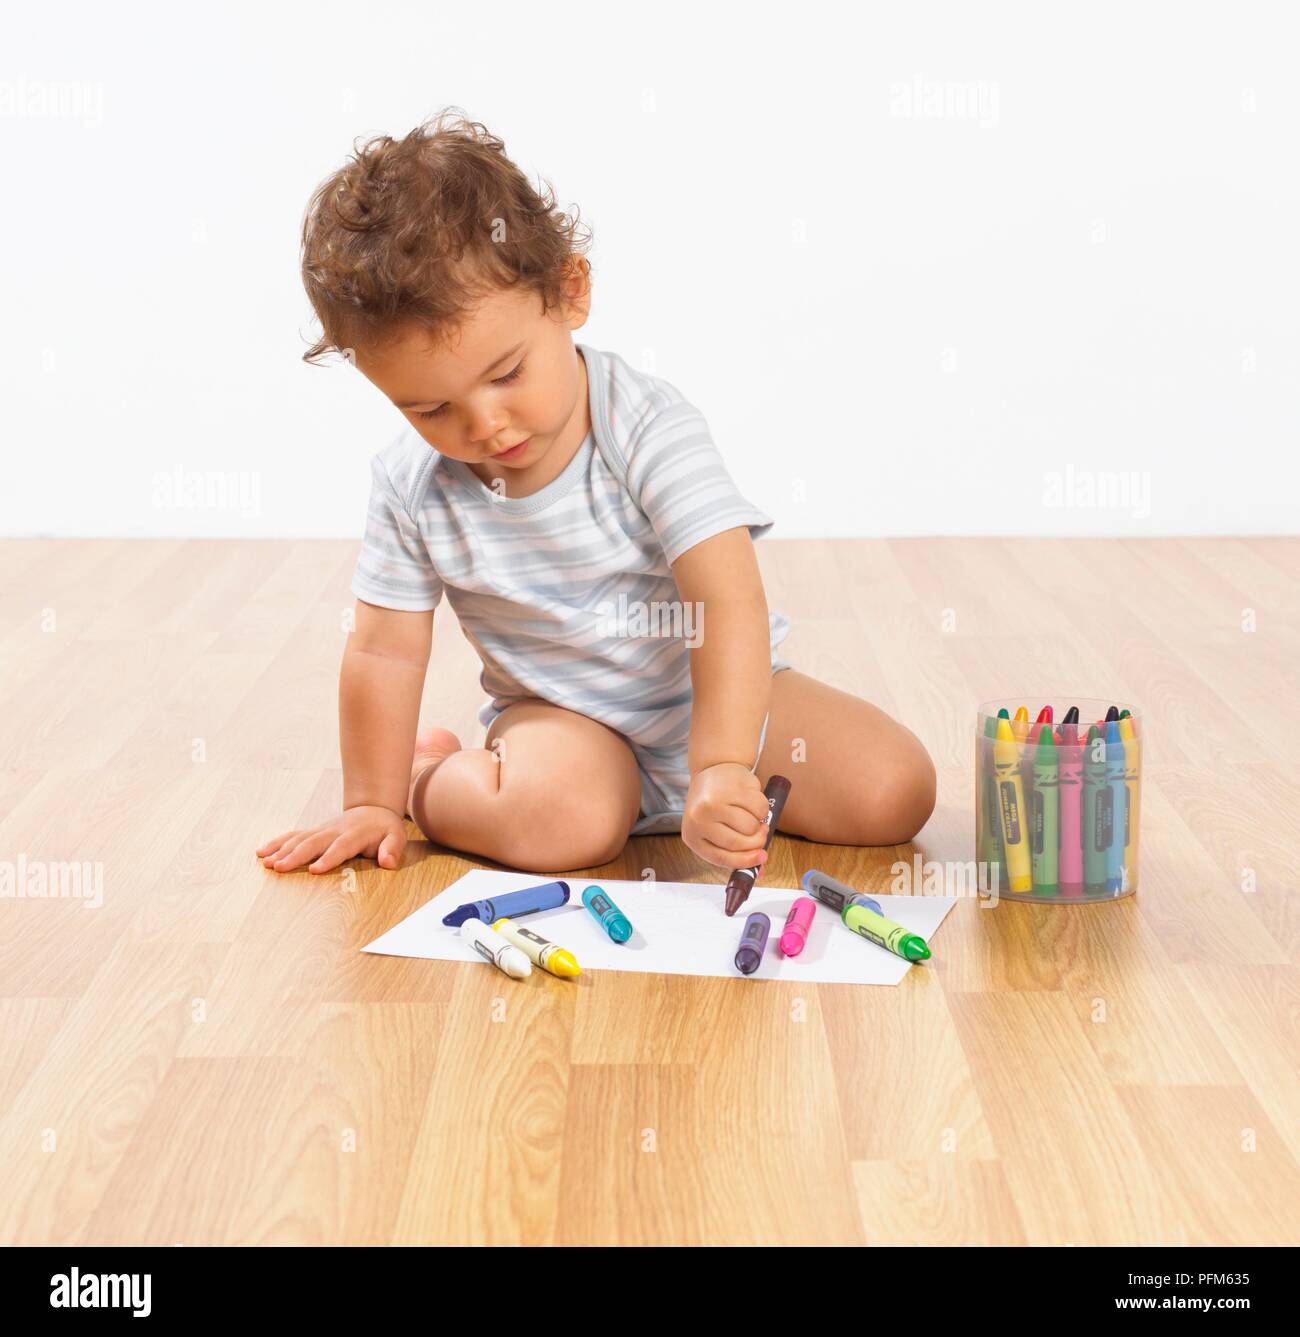 Baby boy sitting on floor drawing with wax crayons Stock Photo